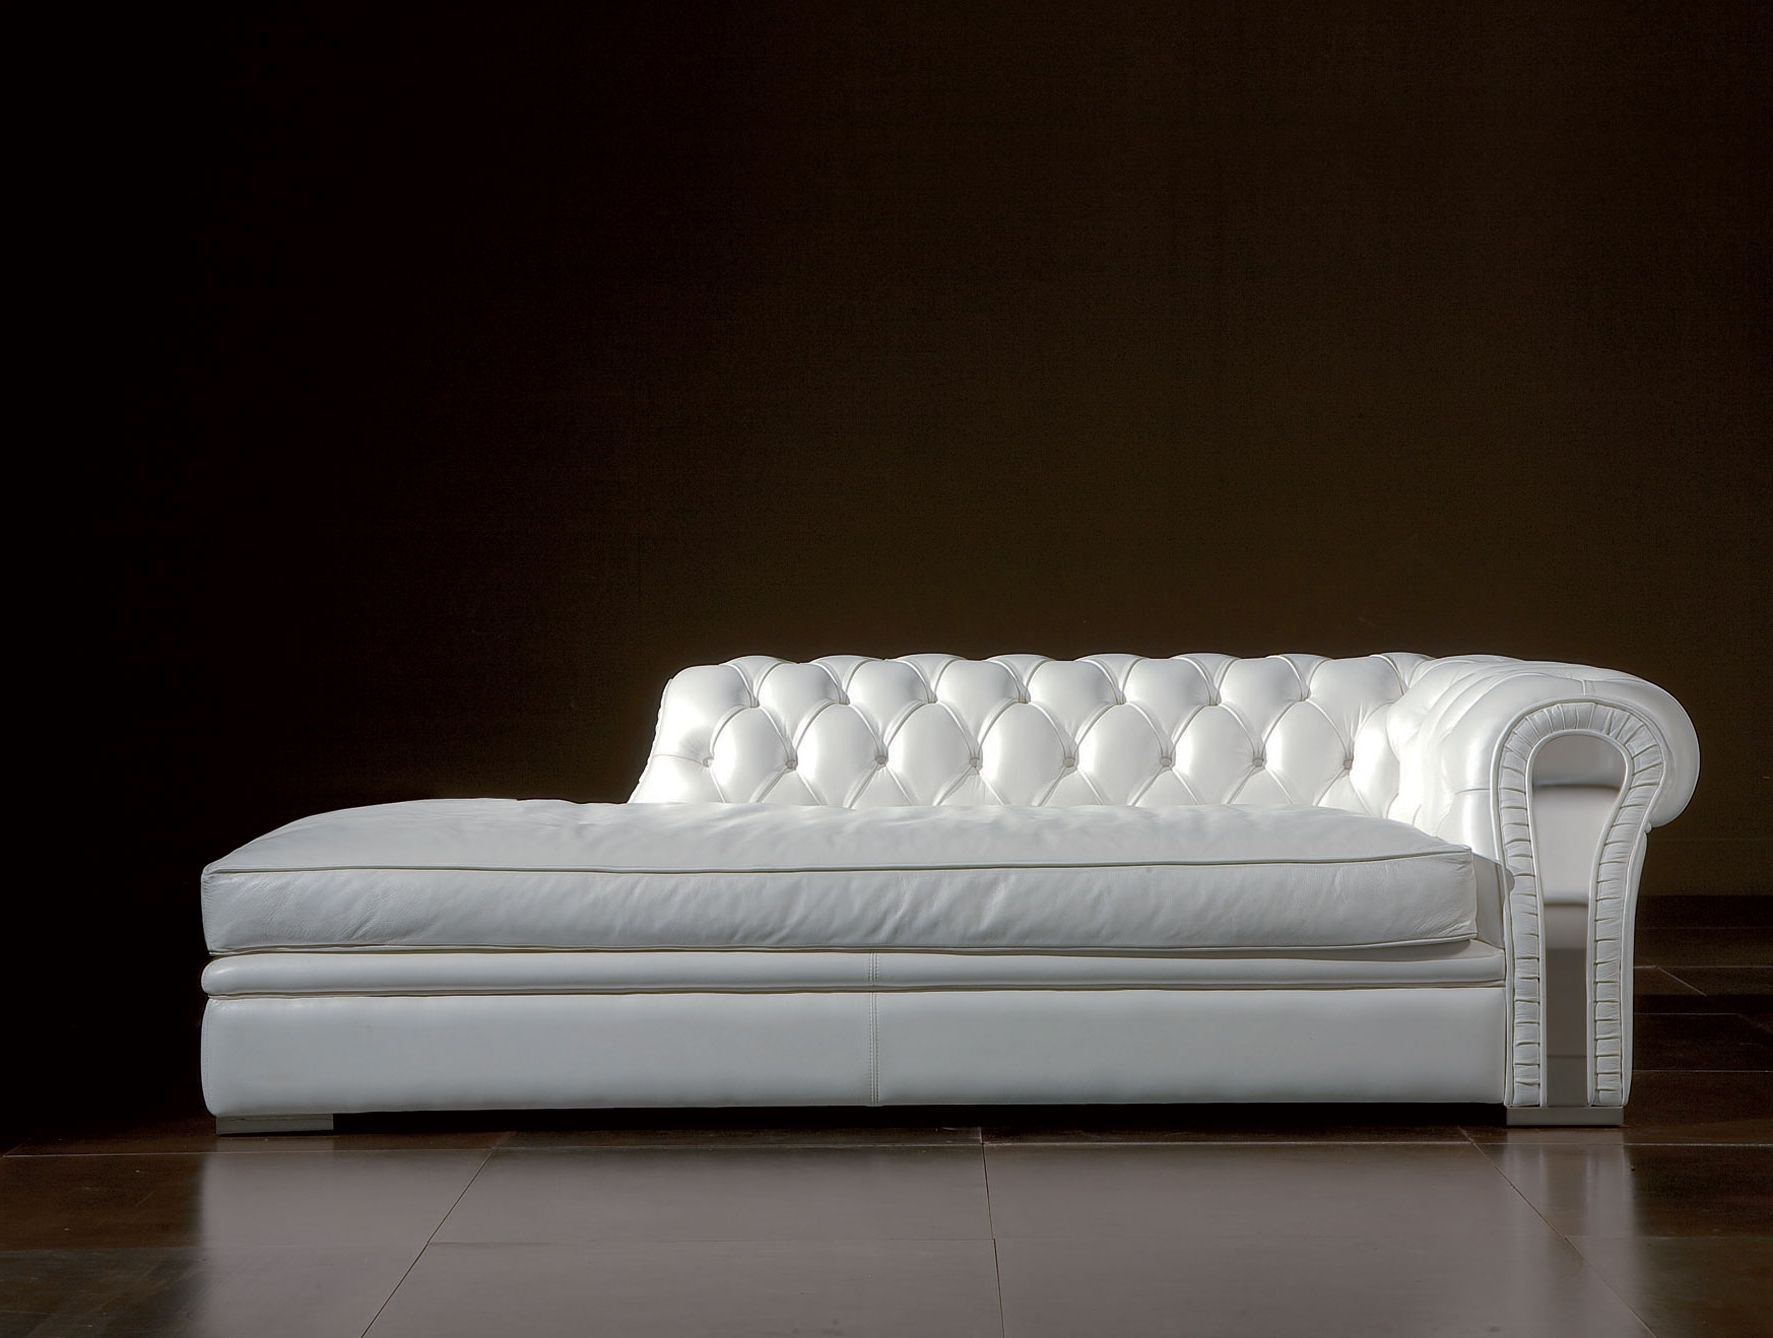 Best And Newest Long White Leather Sofa Chaise Lounge With Puffed Headboard Placed With White Leather Chaise Lounges (View 6 of 15)